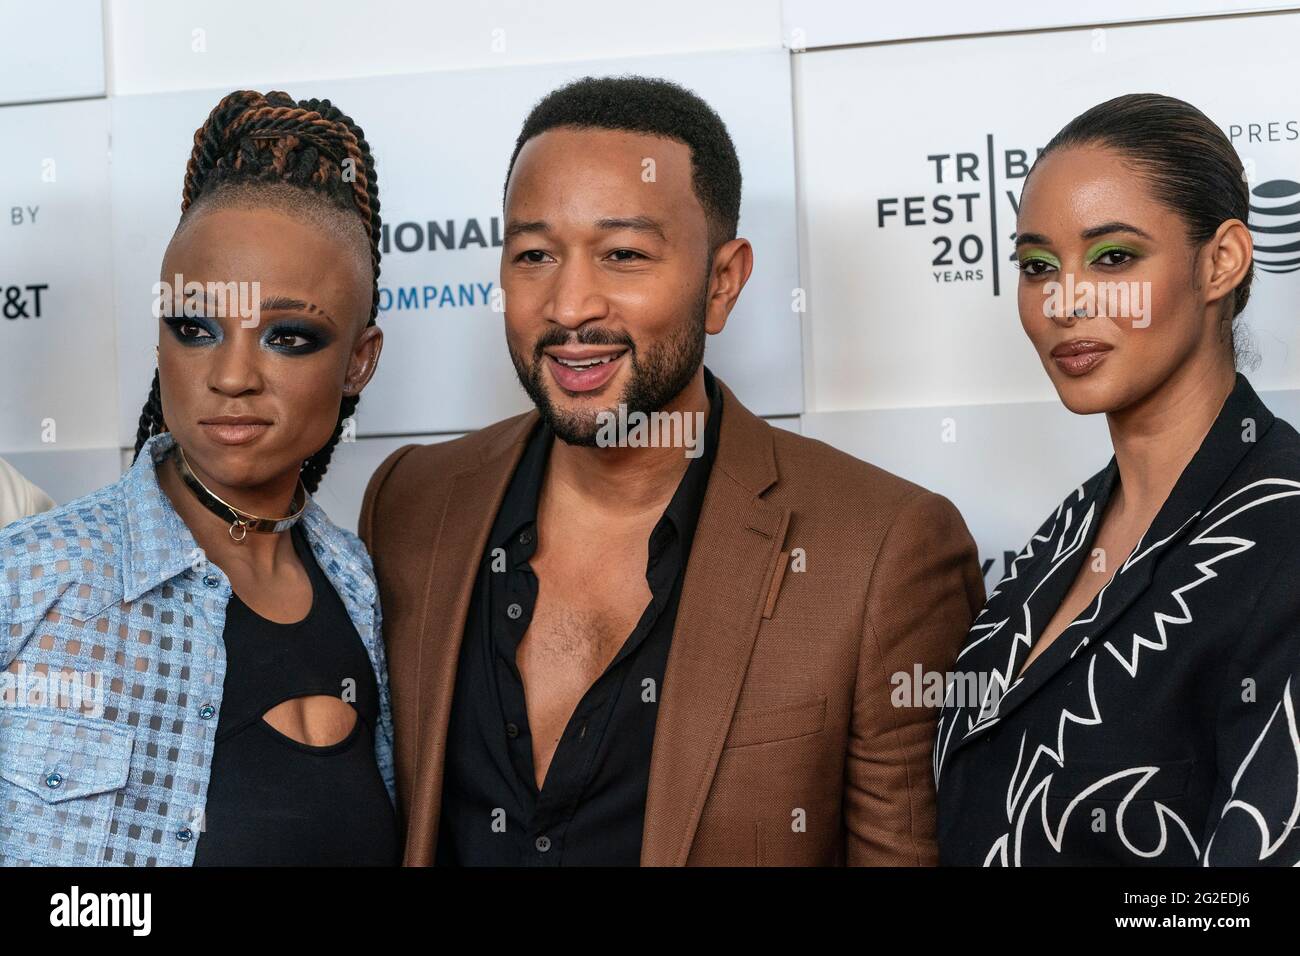 New York, NY - June 10, 2021: Director Nneka Onuorah, producer John Legend director Giselle Bailey pose at The Legend of the Underground premiere at Tribeca Film Festival at Waterfront Plaza, Battery Park City Stock Photo